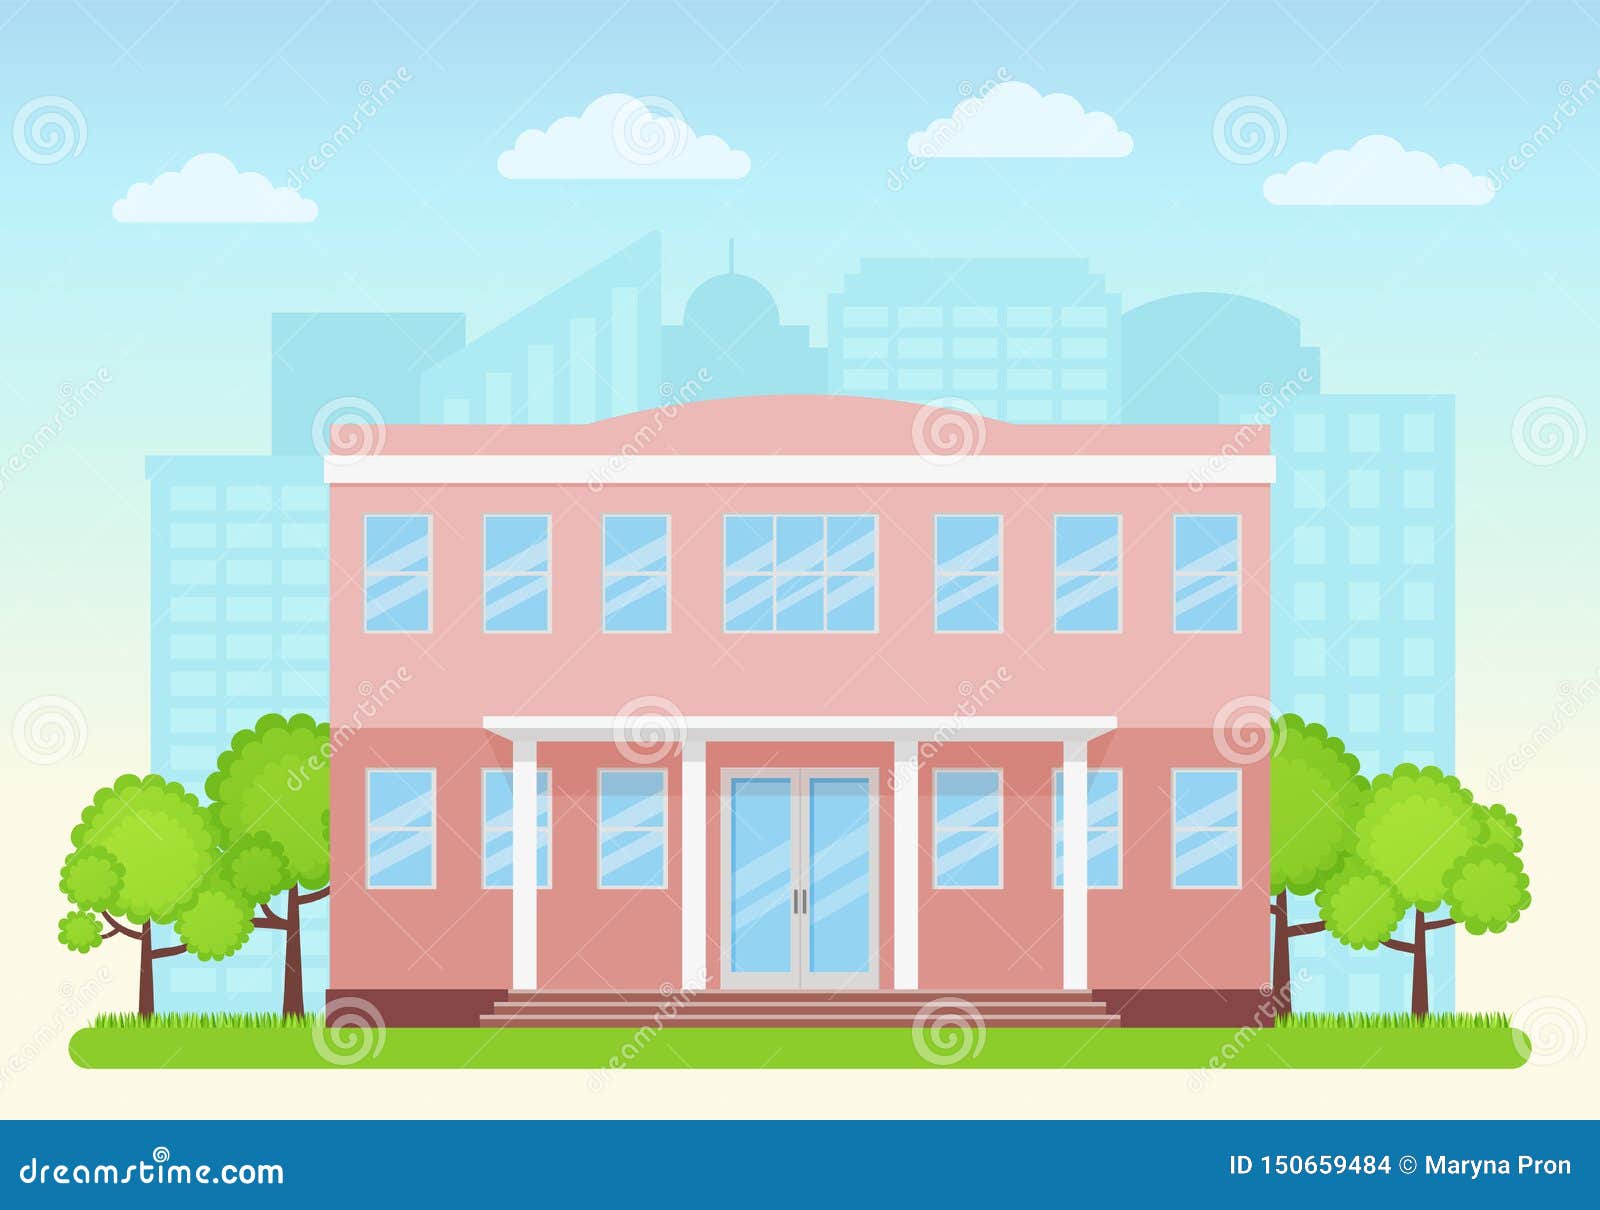 College Facade. Vector Illustration. Building Front View Stock Vector ...